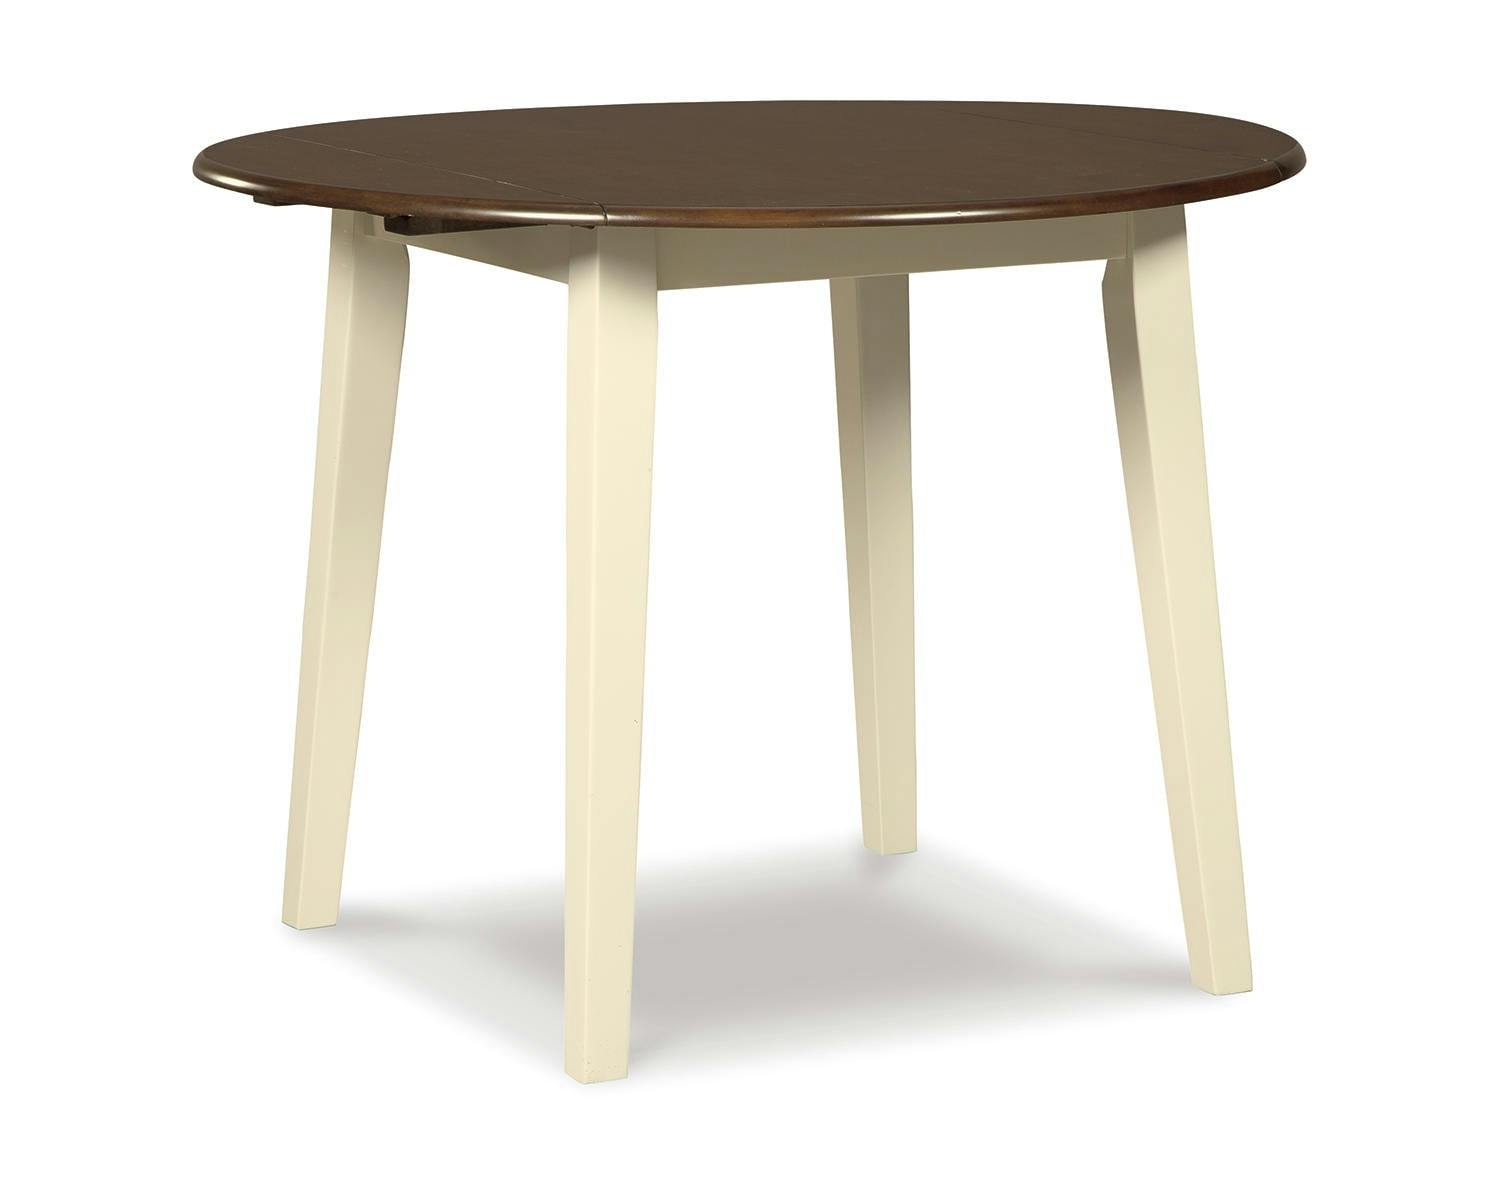 Cottage Charm Cream and Brown Round Extendable Dining Table